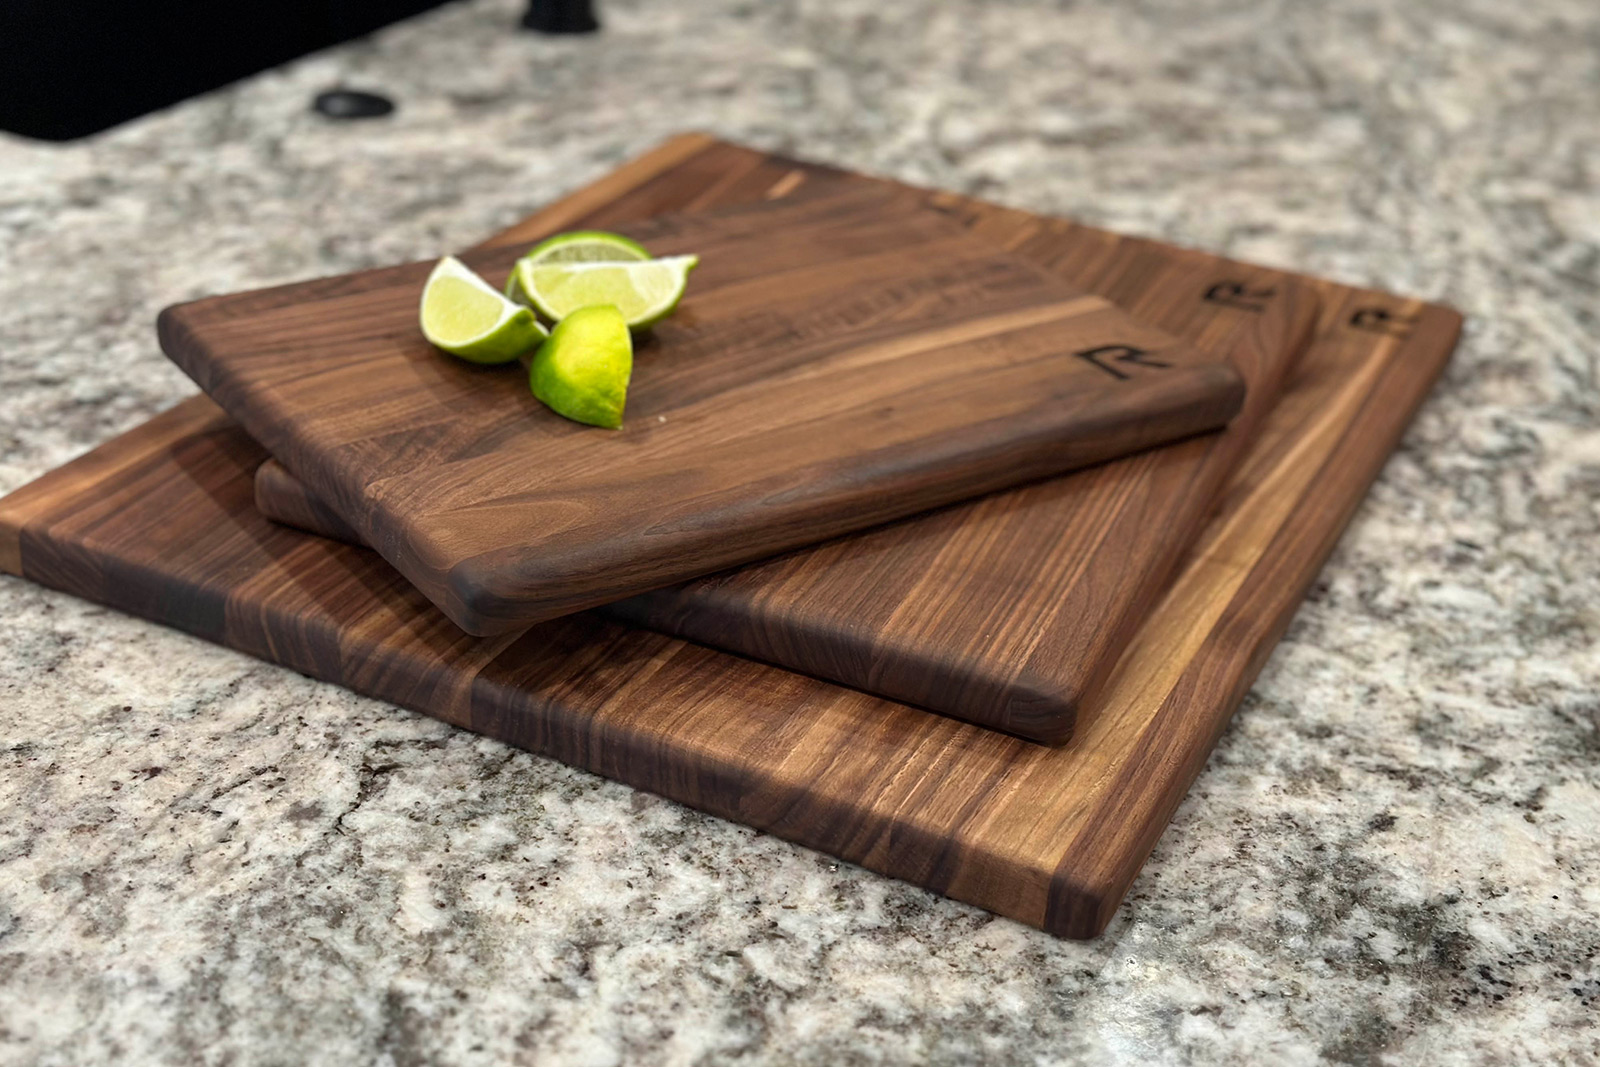 RoseWood & Co Cutting board set- Utility set is heavy duty for BBQ, brisket, grilling and will last a lifetime. Our cutting blocks are handmade in the US. Walnut wood cutting block set